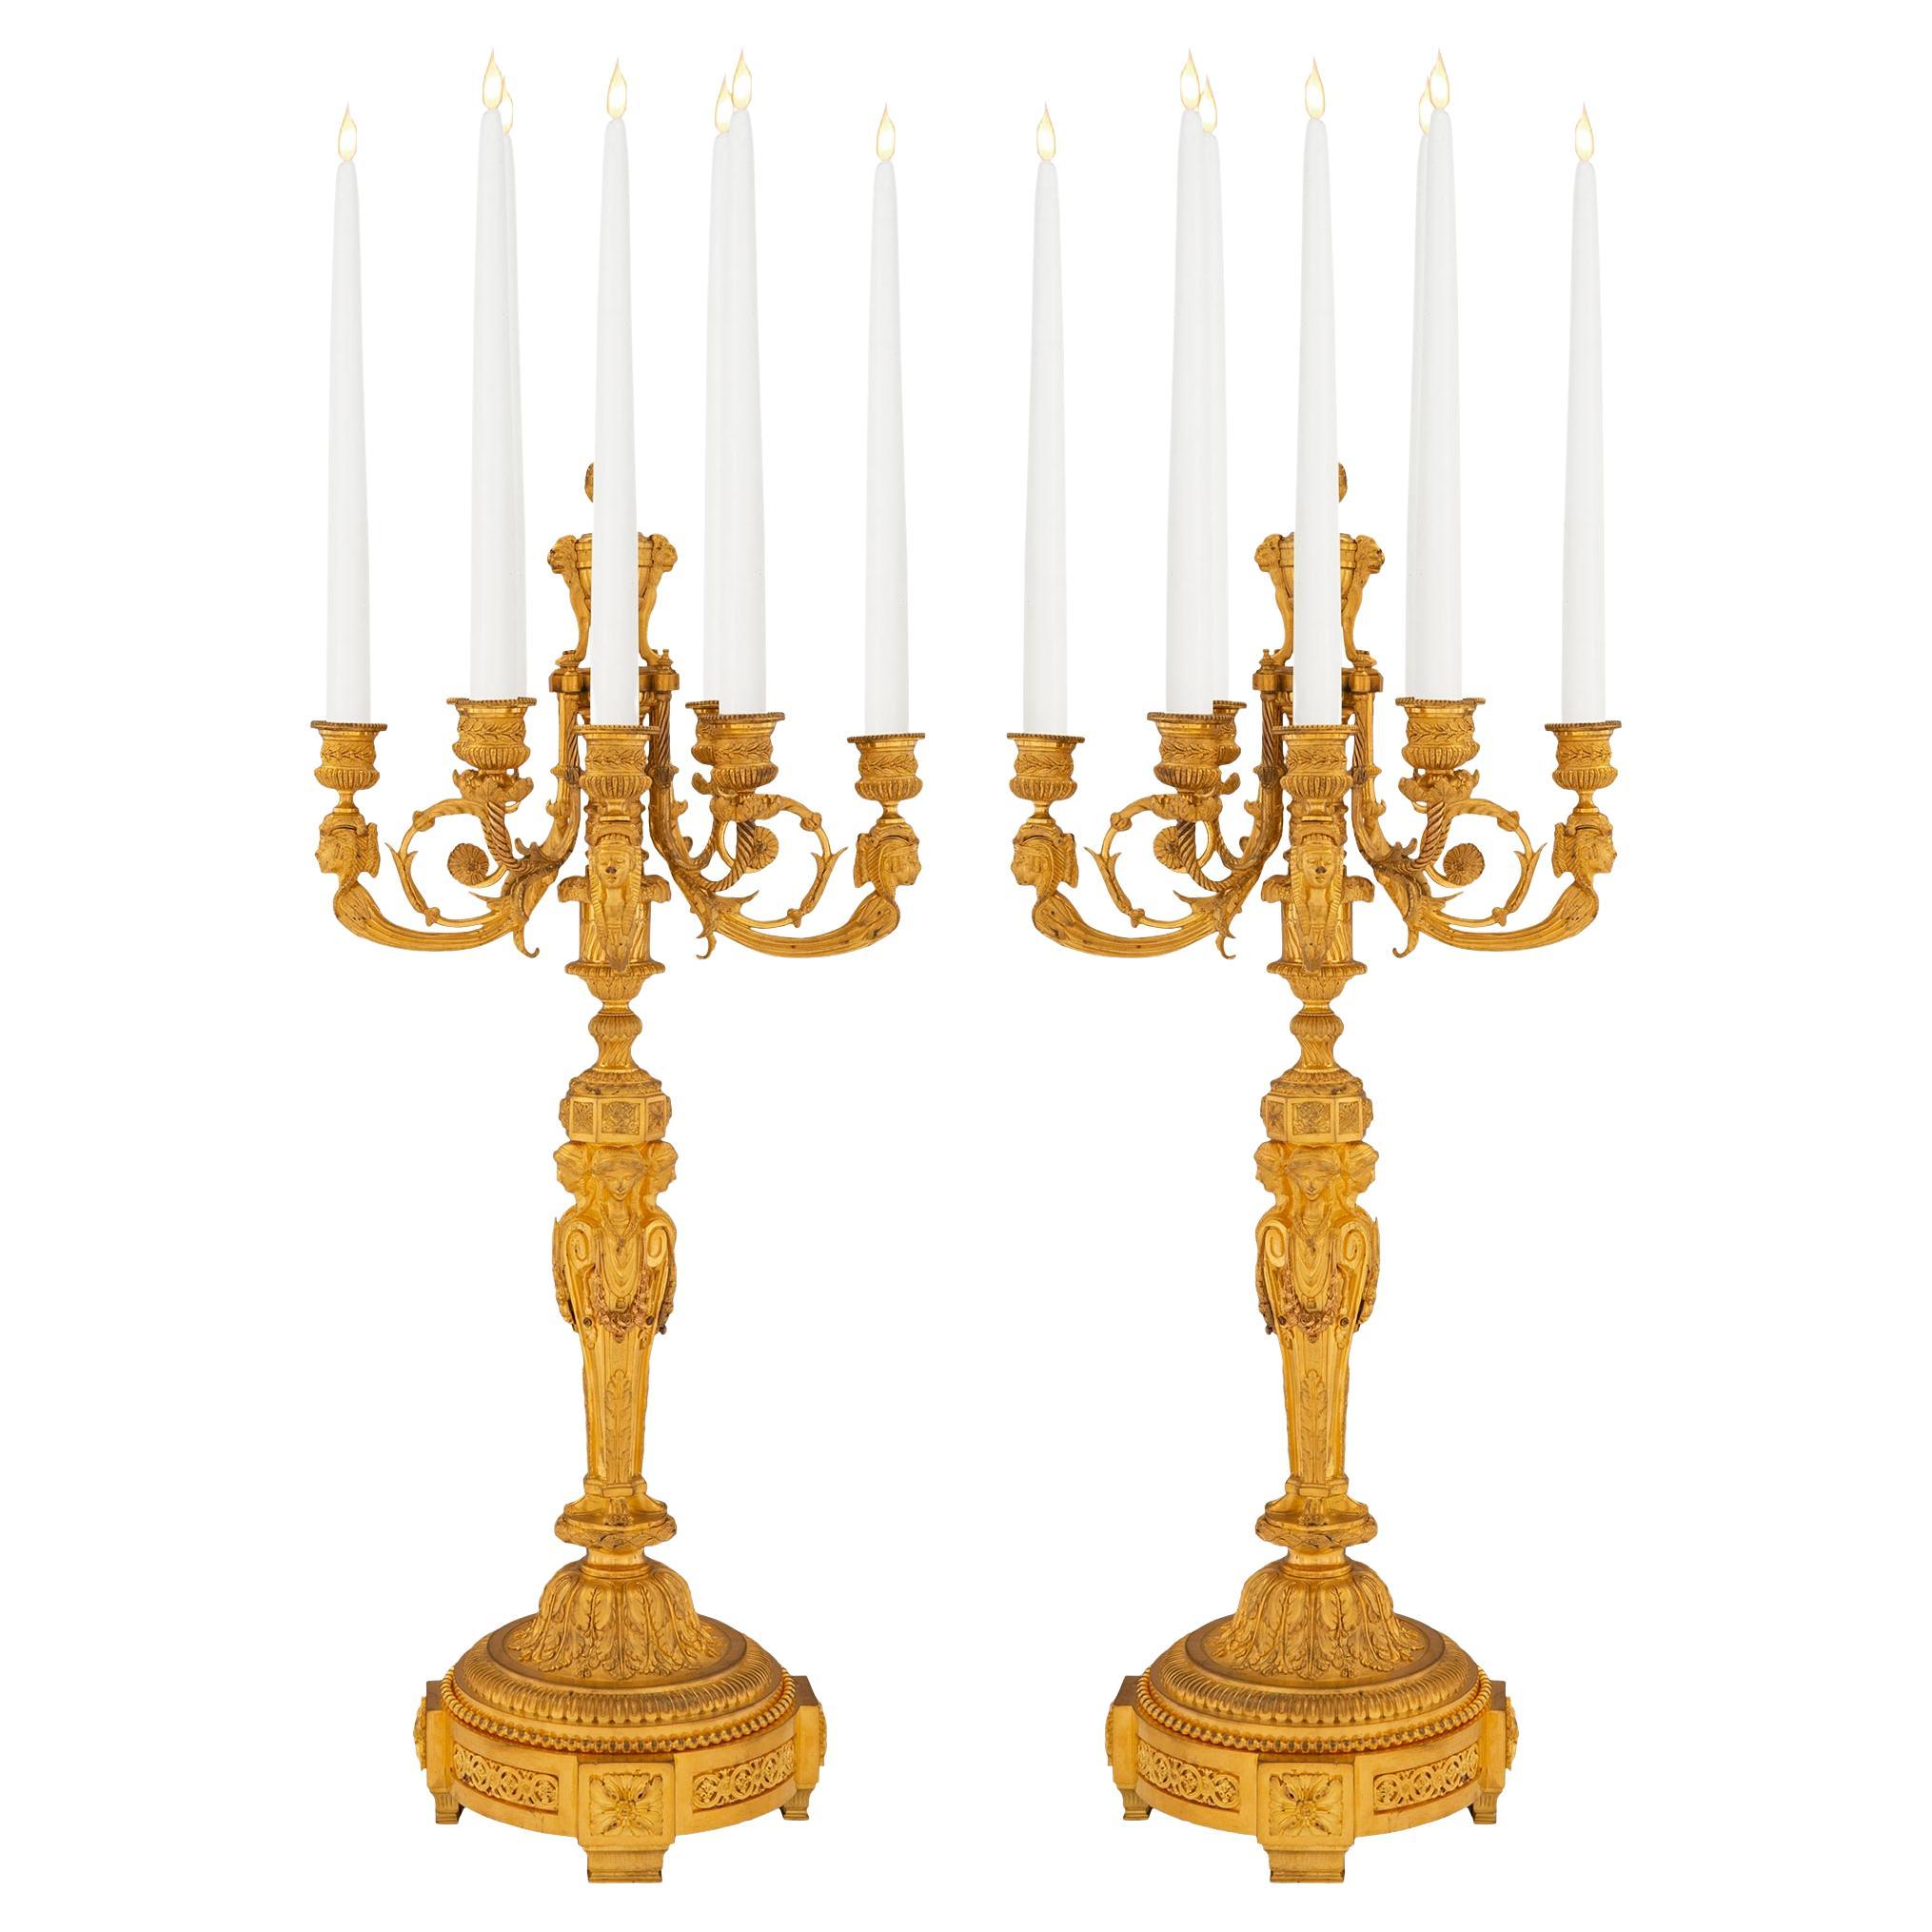 Pair of French Early 19th Century Louis XVI St. Ormolu Candelabras